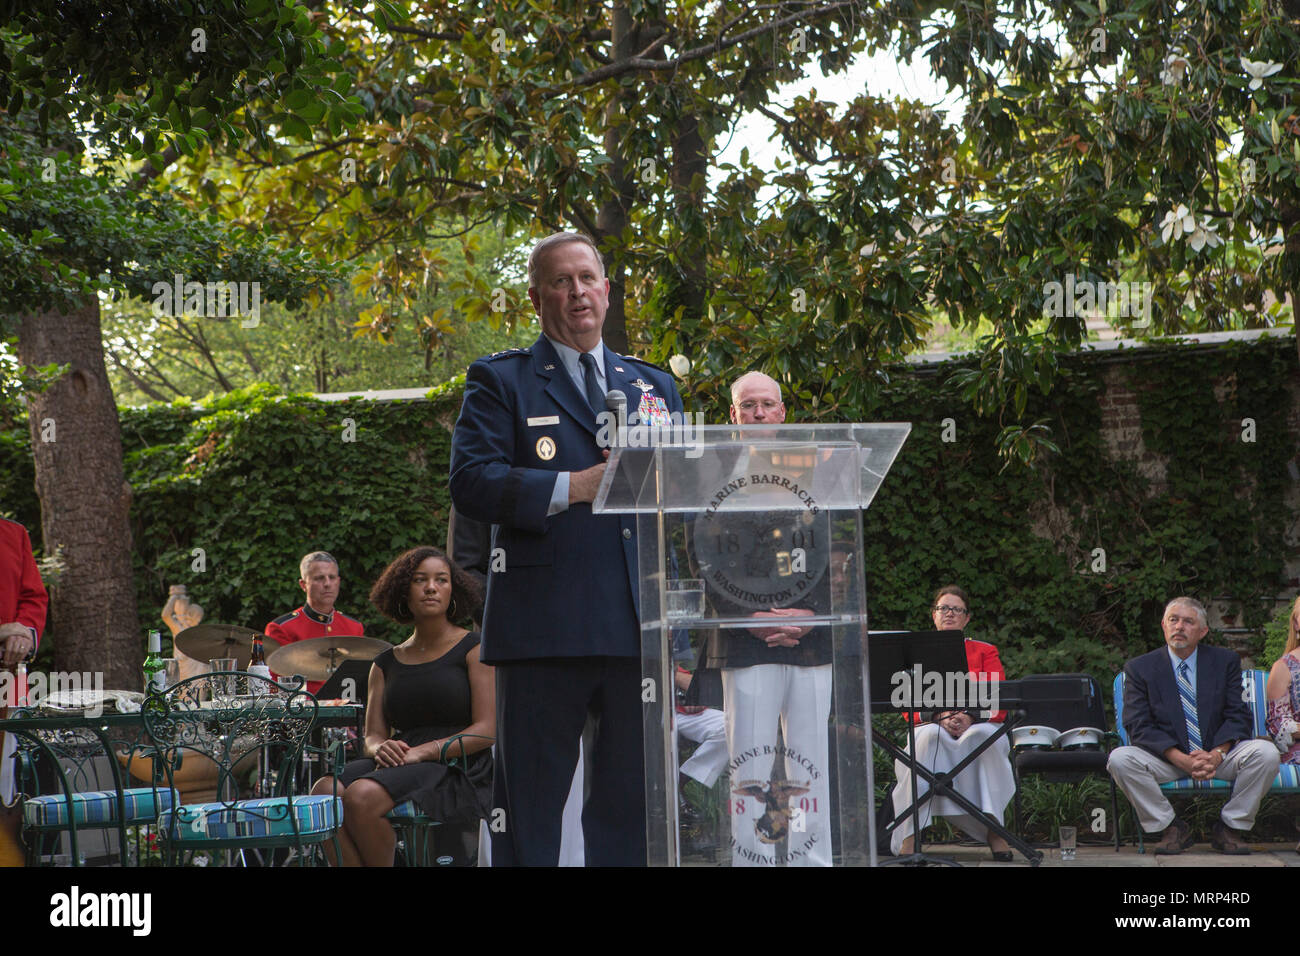 U.S. Air Force Lt. Gen. Thomas J. Trask, vice commander of Headquarters U.S. Special Operations Command (SOCOM), gives remarks during the evening parade reception at Marine Barracks Washington, Washington, D.C., June 23, 2017. Evening parades are held as a means of honoring senior officials, distinguished citizens and supporters of the Marine Corps. (U.S. Marine Corps photo by Lance Cpl. Stephon L. McRae) Stock Photo